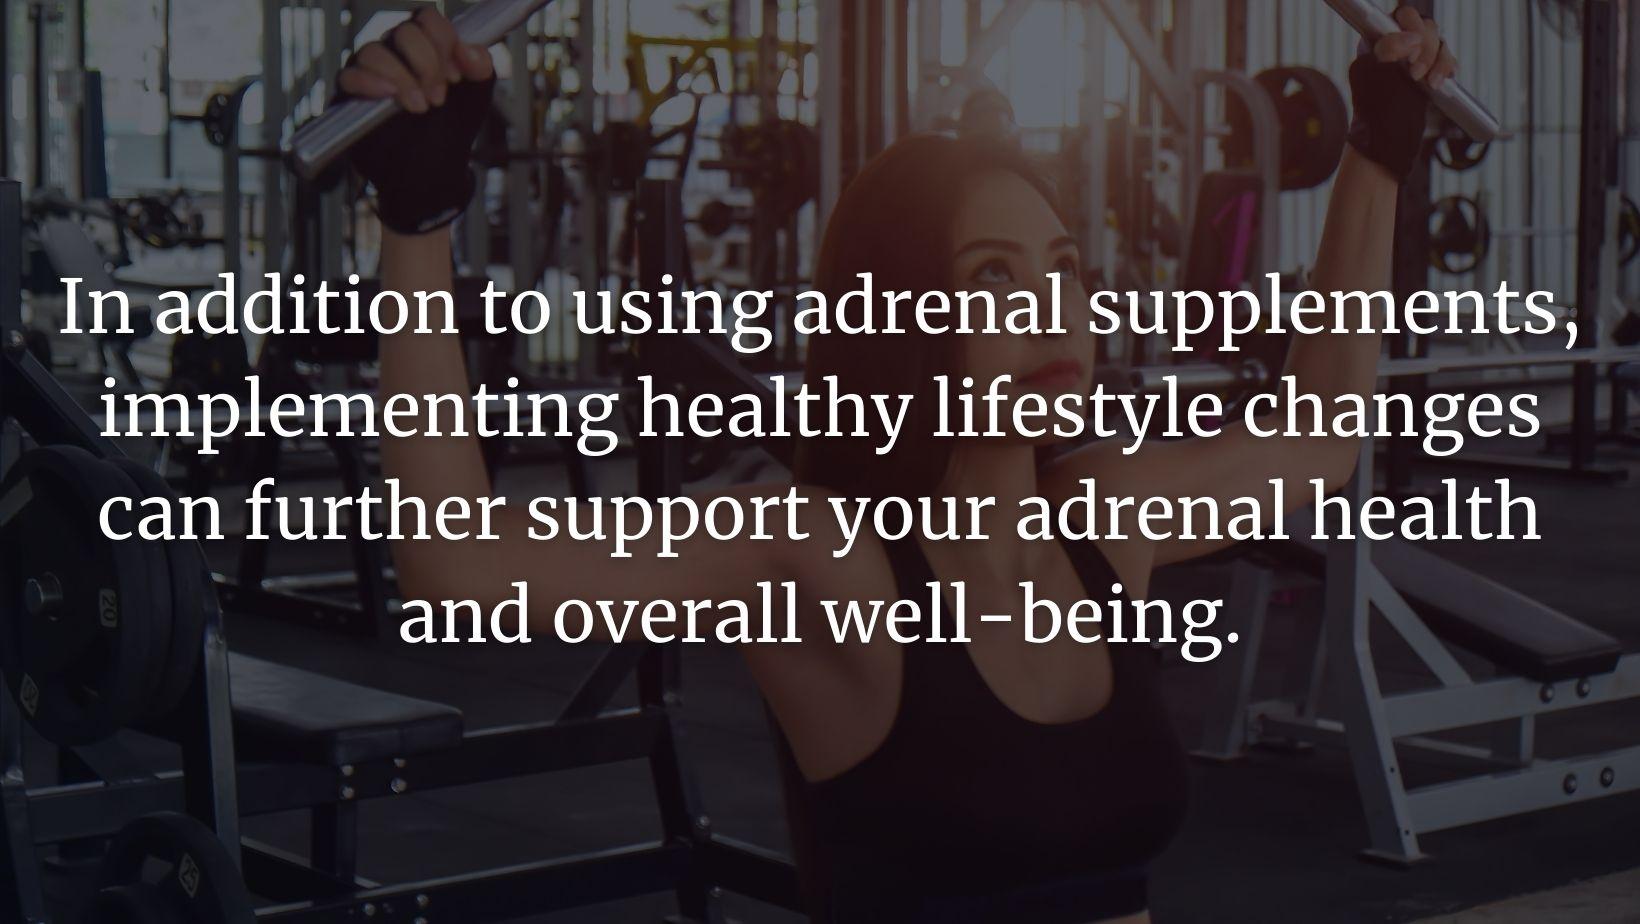 adrenal supplements featured text one